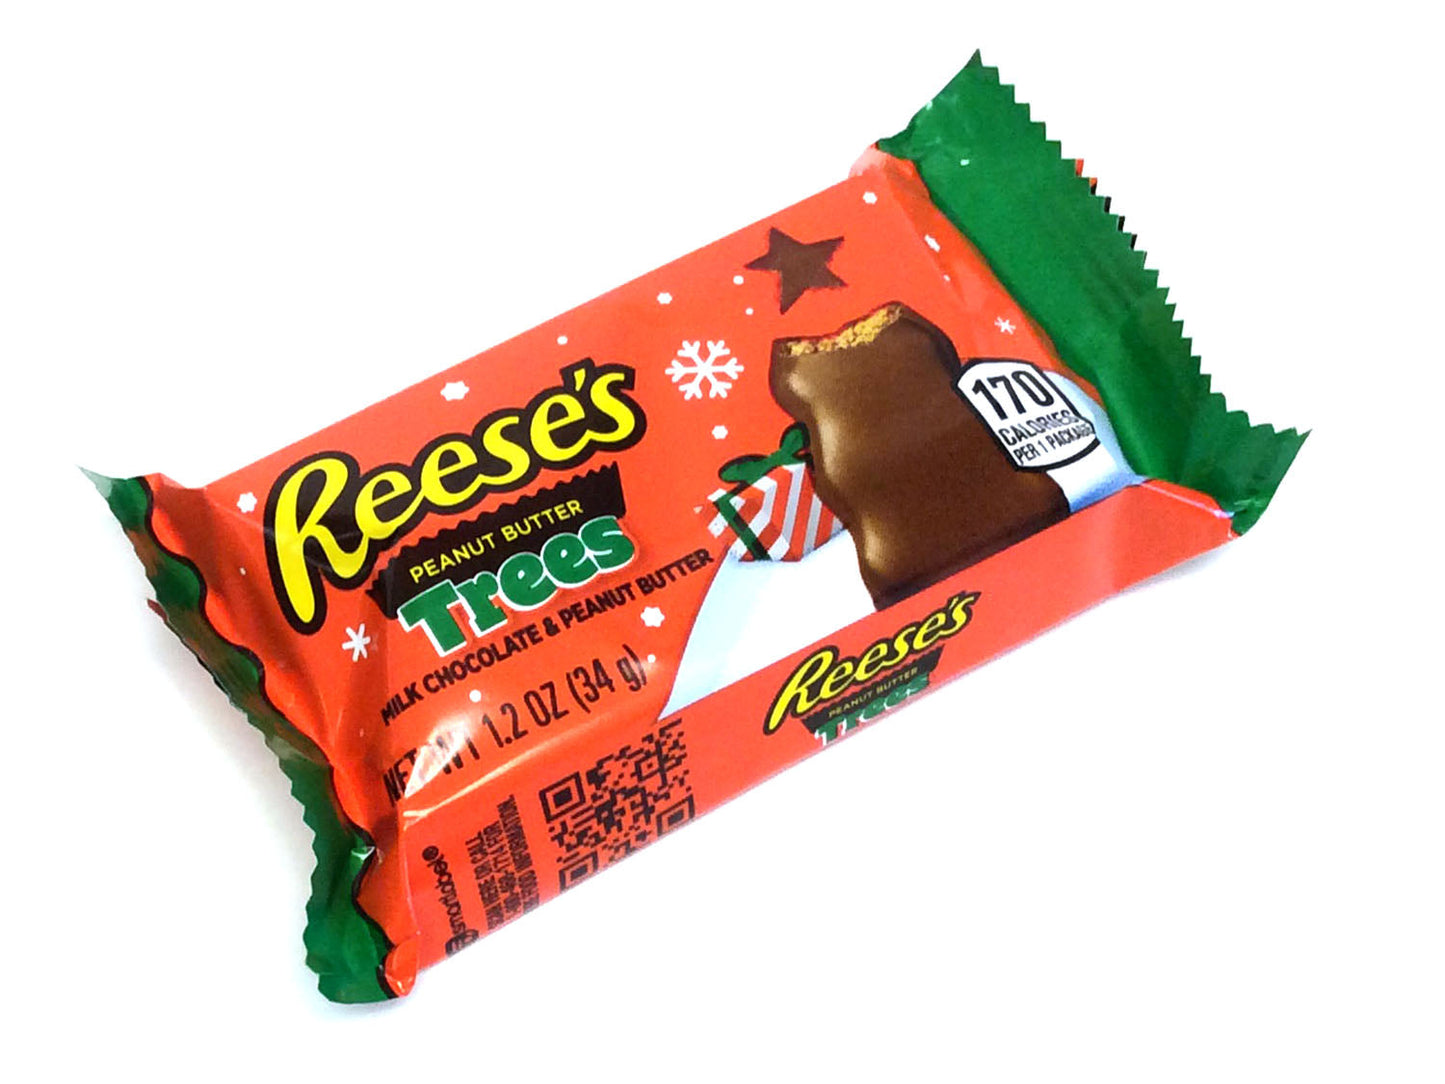 Reese's Peanut Butter Christmas Tree - 1.2 oz